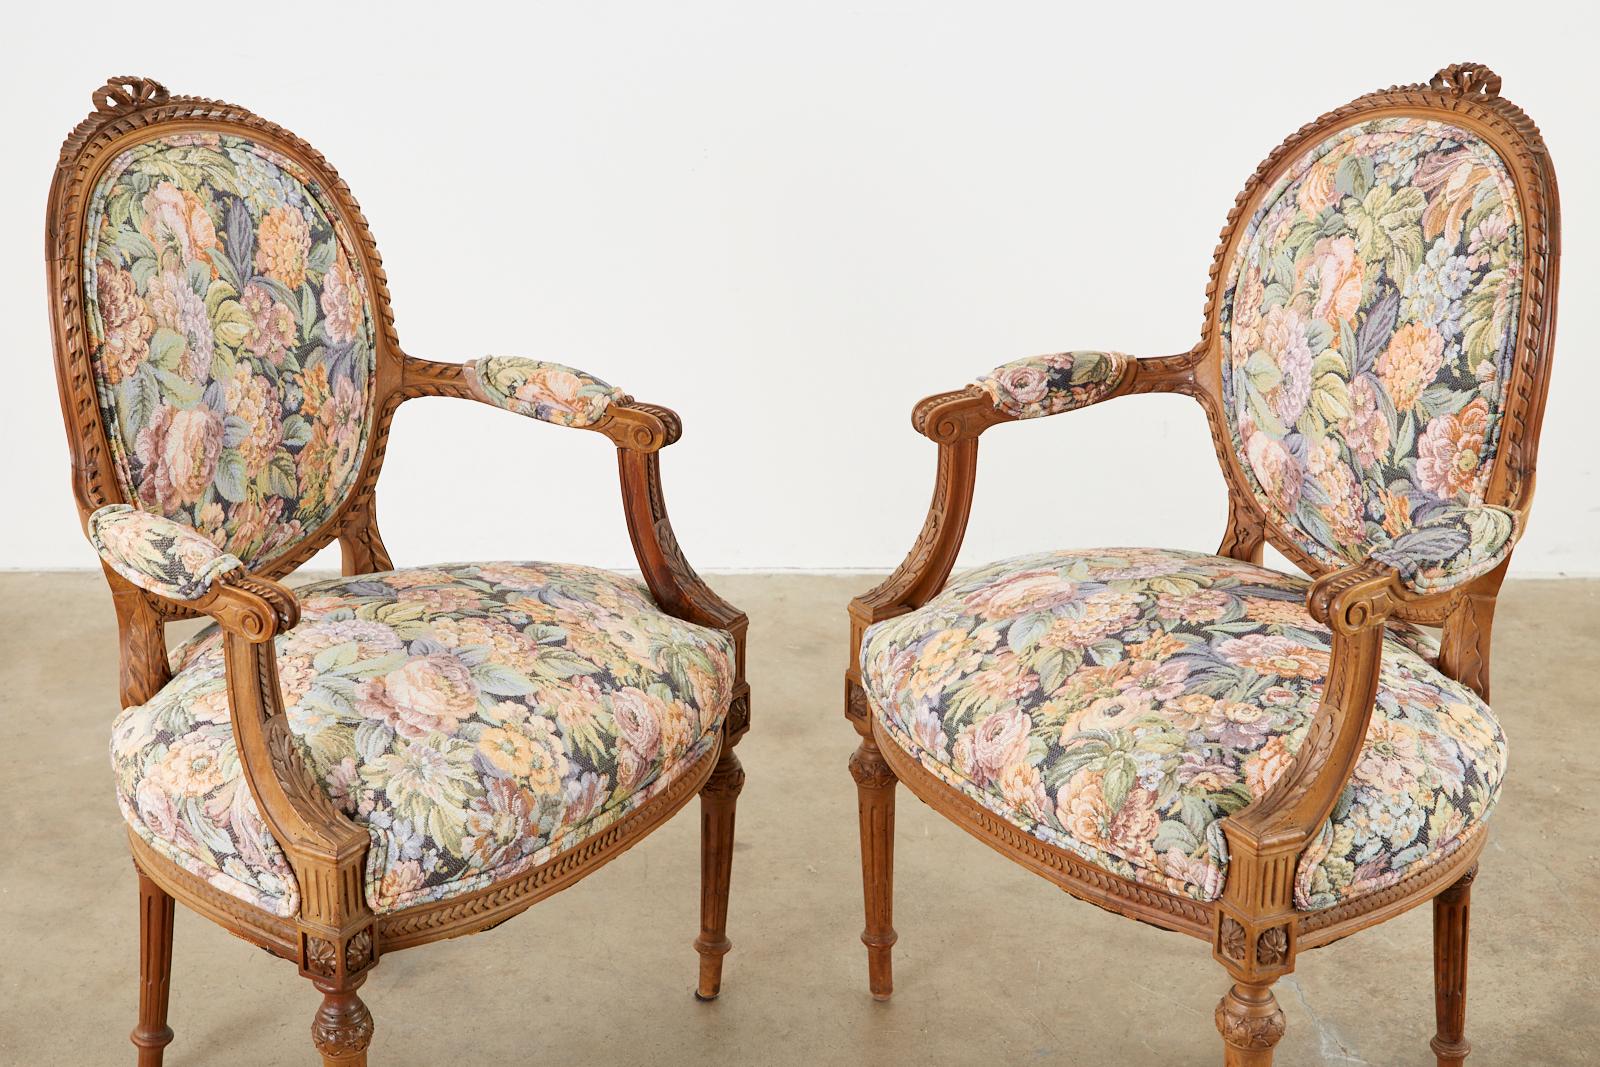 Impressive pair of French carved fauteuil armchairs made in the Louis XVI taste. The chairs feature elaborately hand carved frames with rope designs, rosettes, acanthus, and ribbon bow crests on top. Upholstered with a tapestry style fabric with